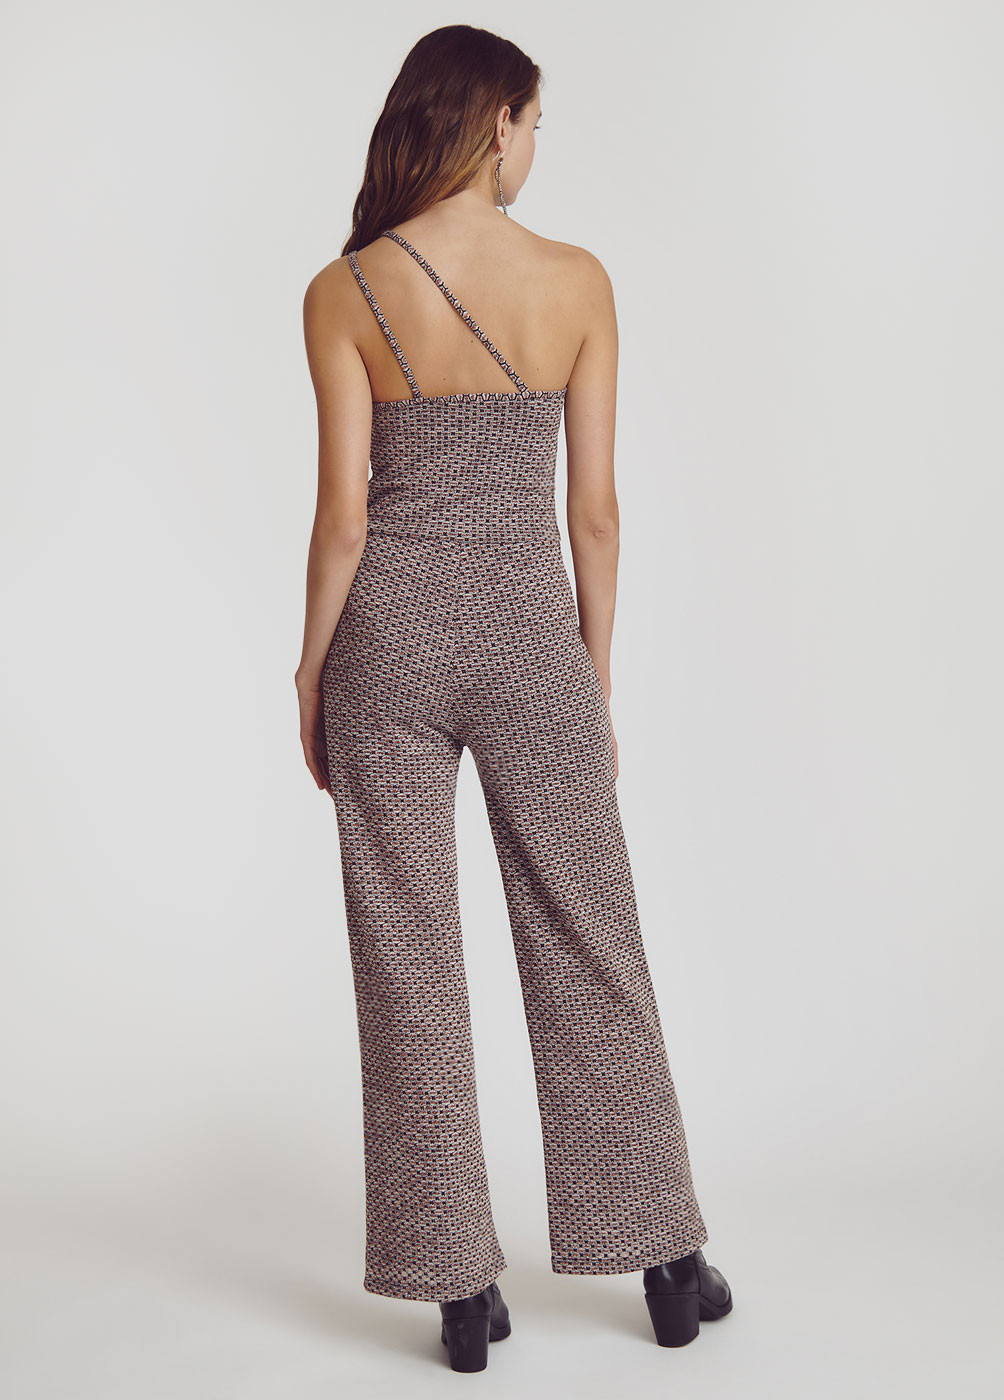 ASYMMETRIC JUMPSUIT IN TEXTURED FABRIC